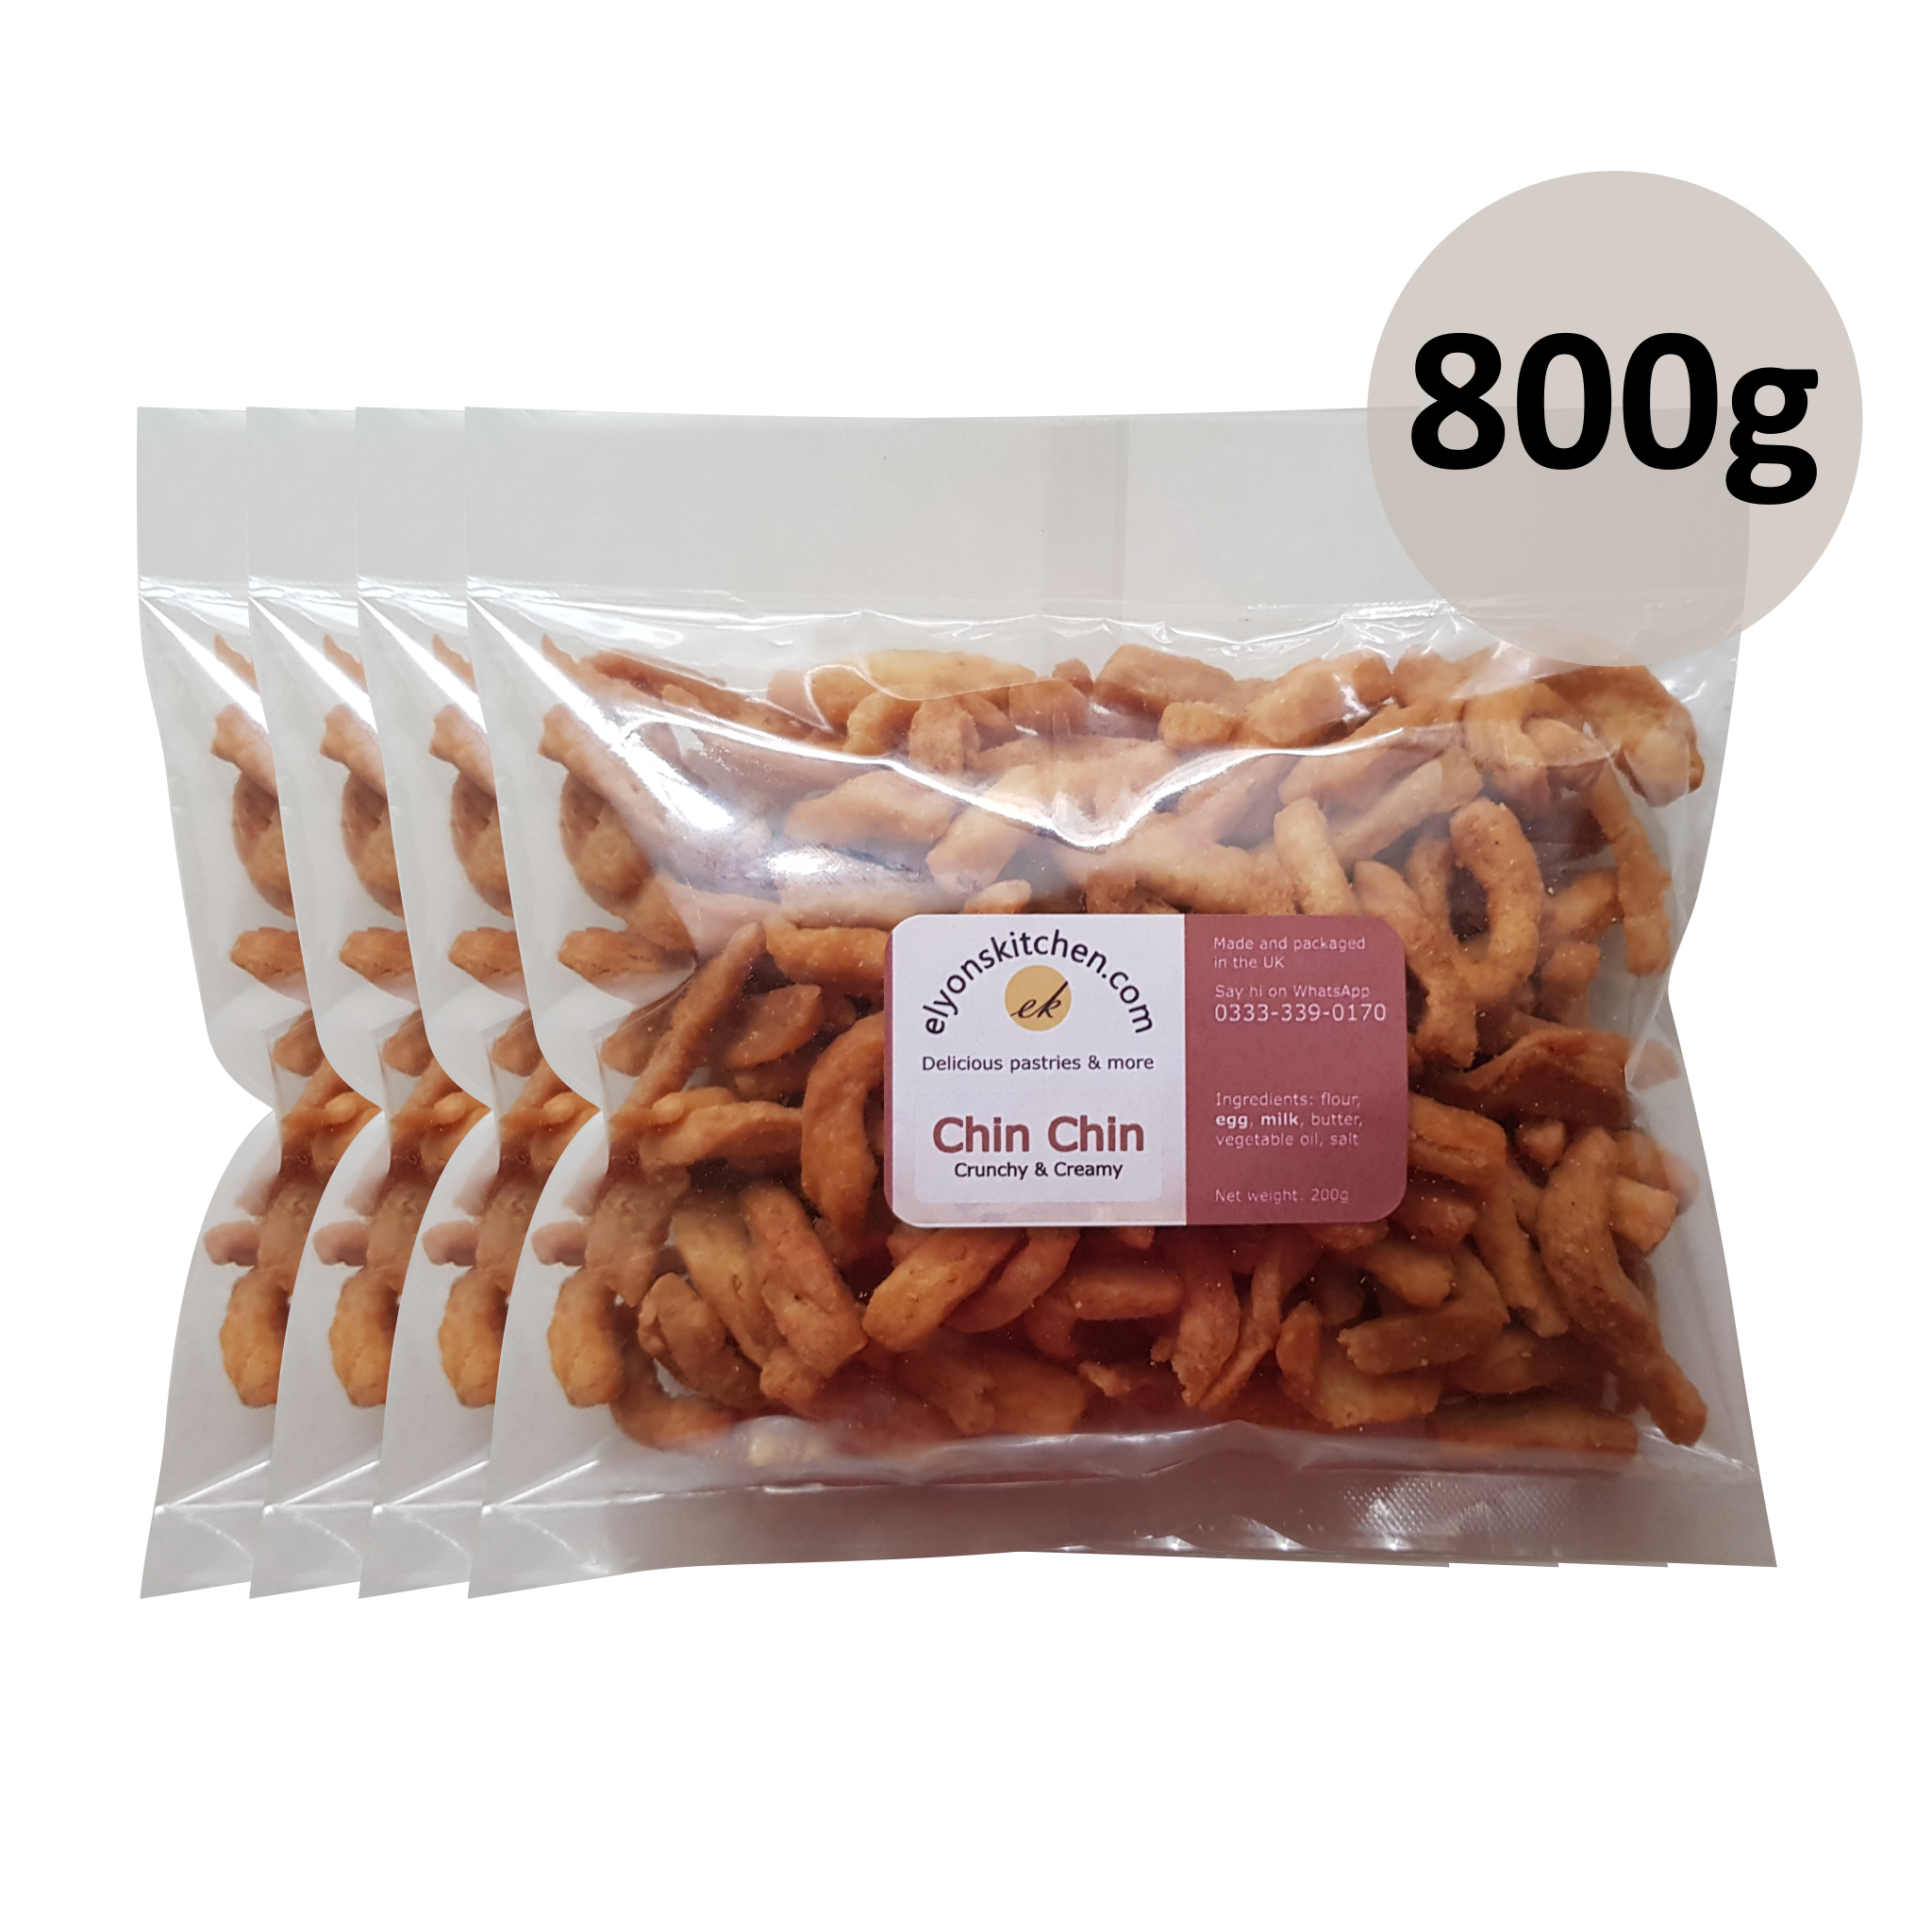 African Shop Near Me - Chin Chin 200g X 4, Crunchy And Creamy, Securely Sealed